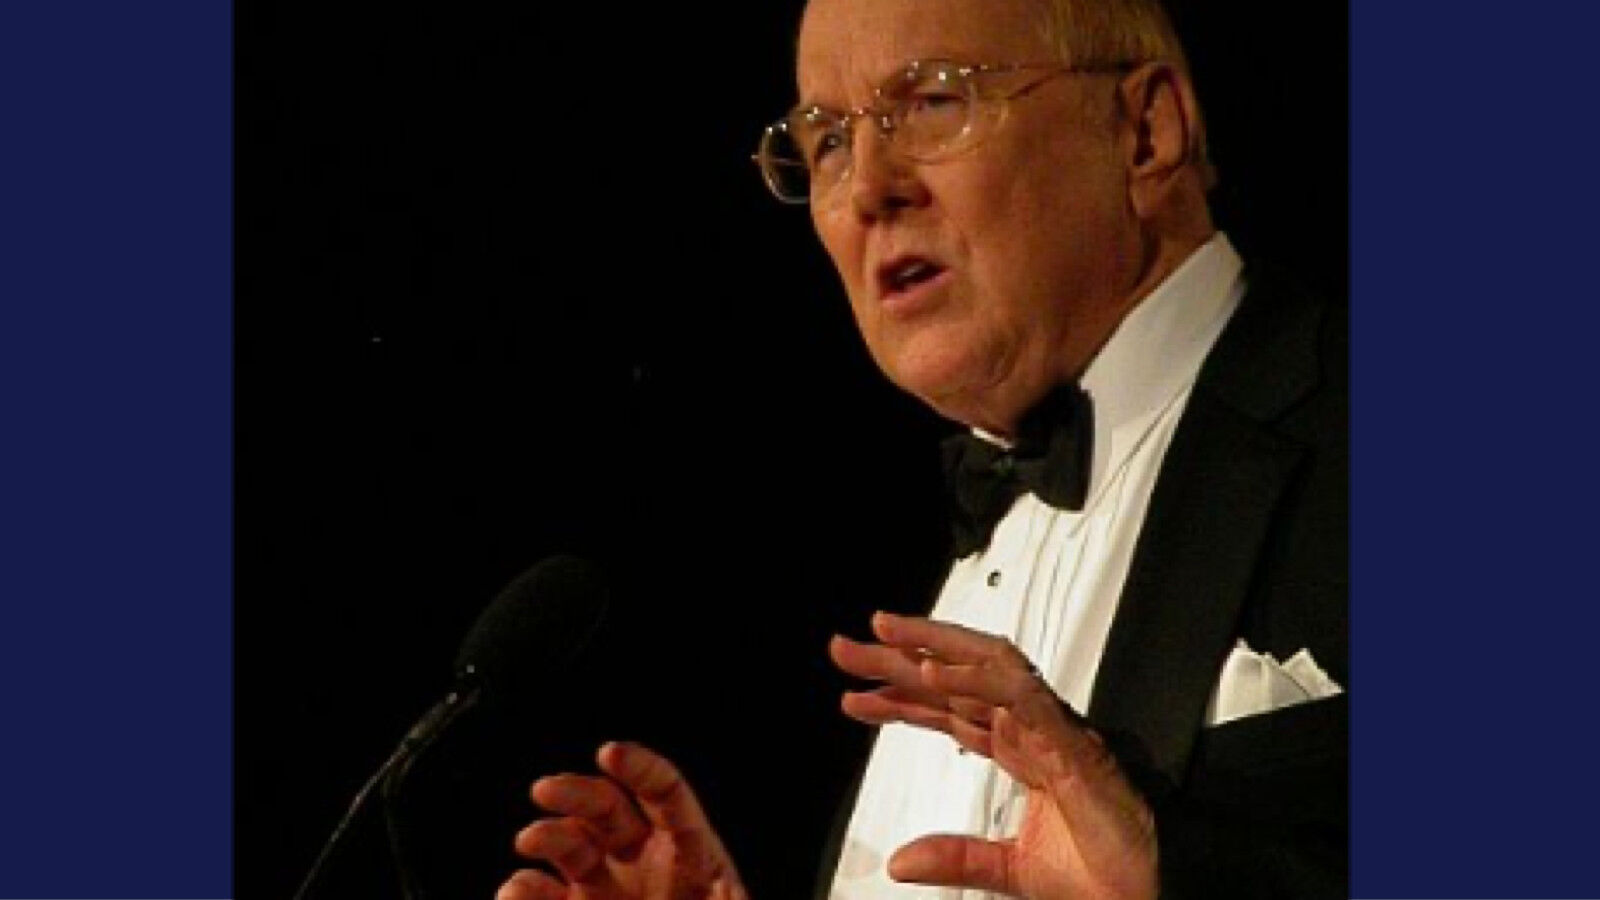 James Dobson in 2007 in Washington, DC at the Values Voters conference